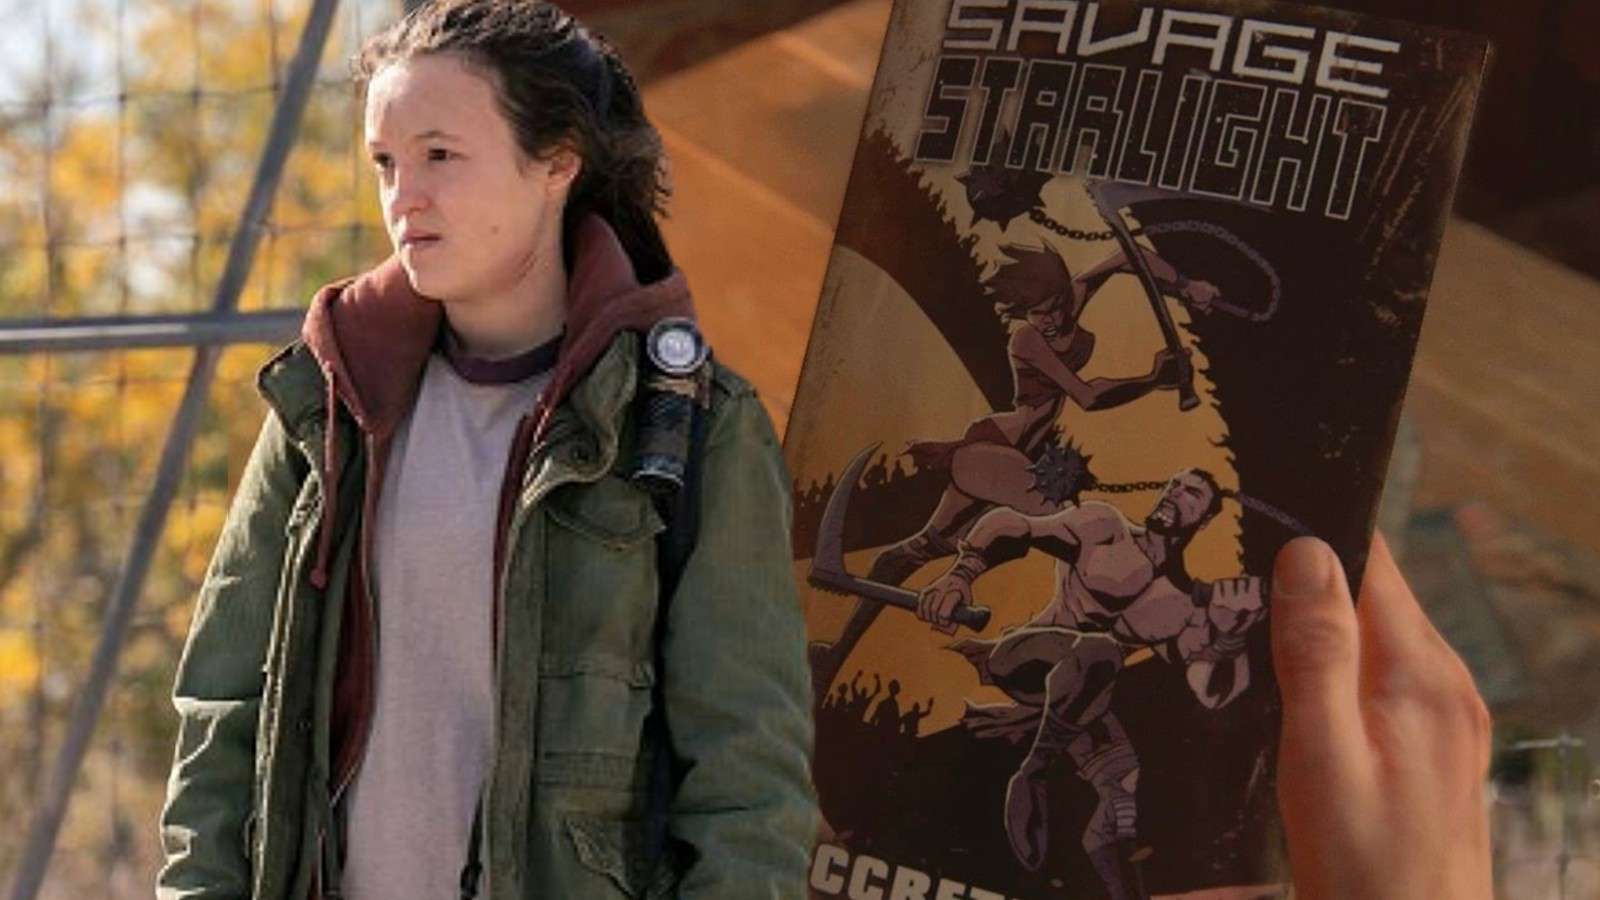 Ellie in The Last of Us and a Savage Starlight comic book